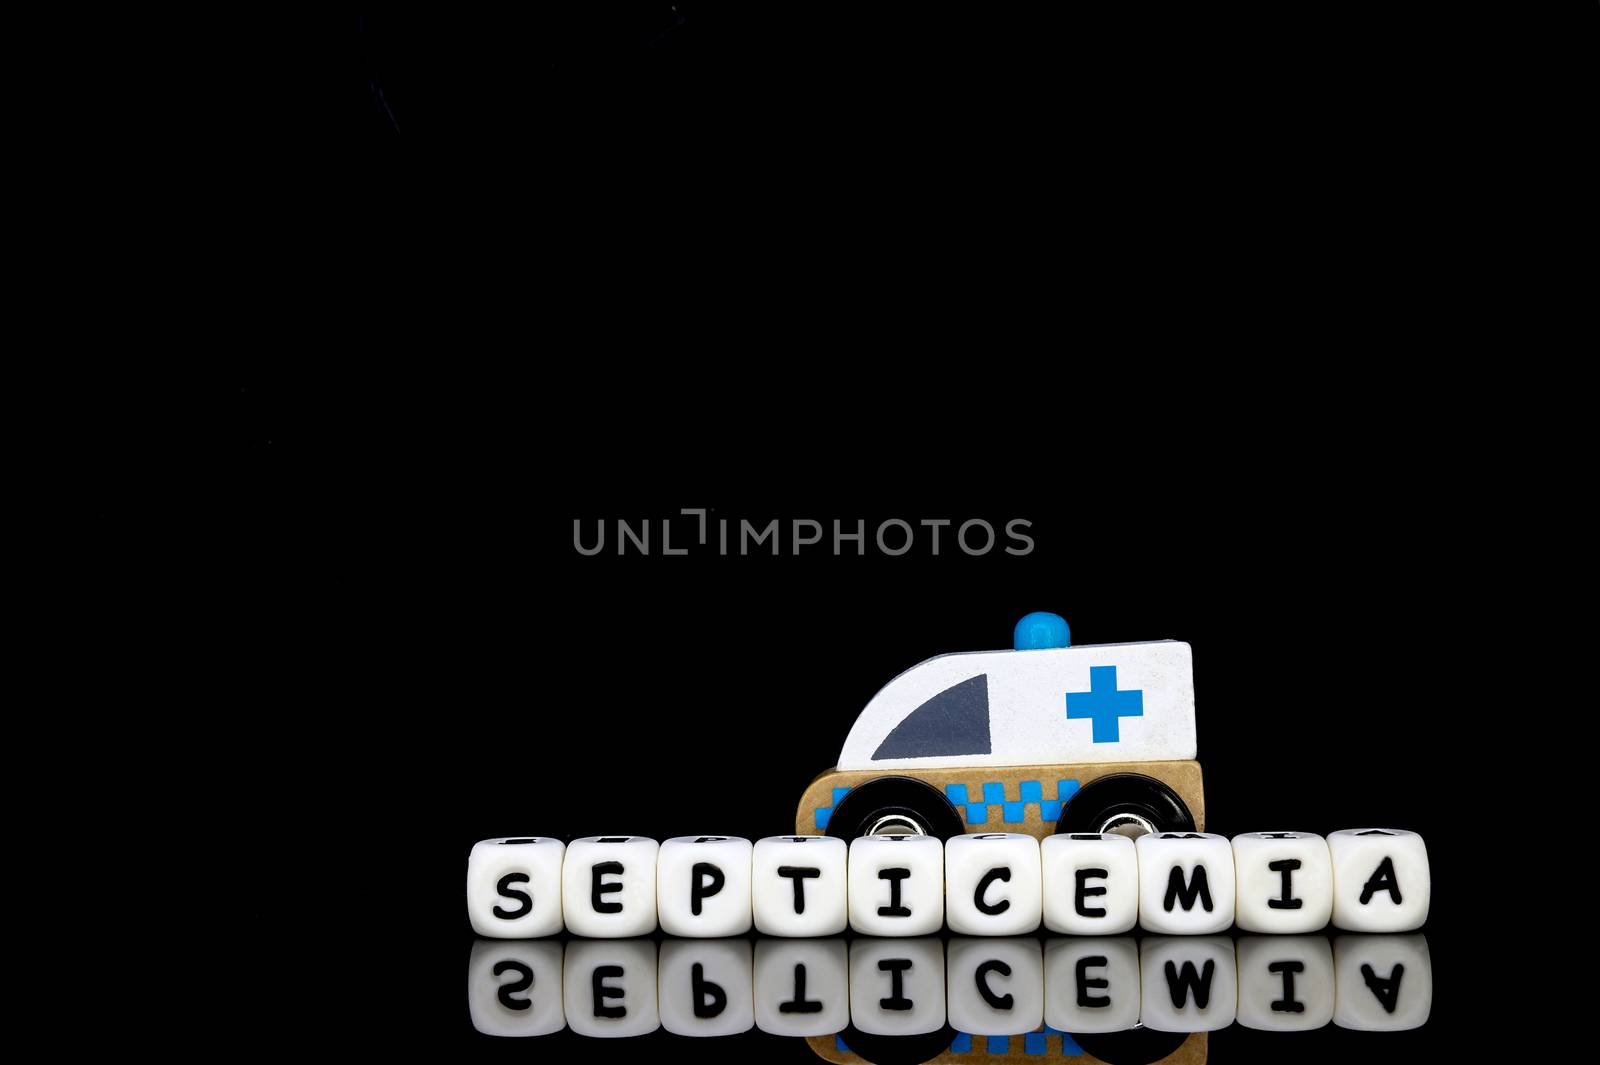 model ambulance and alphabet letters by Nawoot